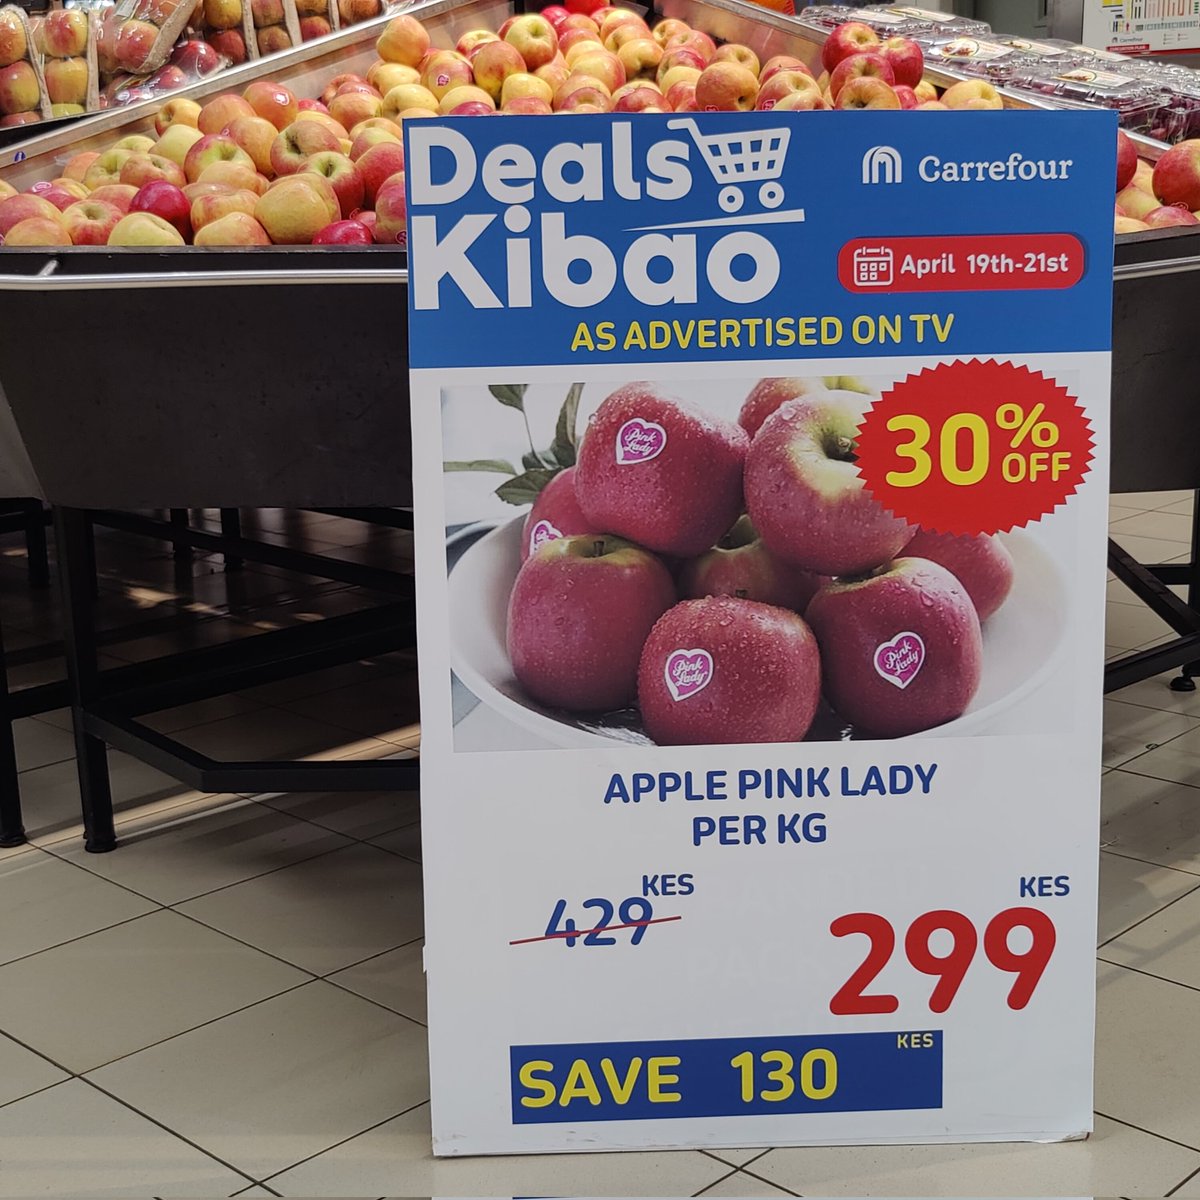 An apple a day just got sweeter! 🍎 Enjoy the crisp and juicy Pink Lady apples at 30% off per kg. Don't miss out on this delicious deal! Valid till 21st Sunday April. #CarrefourKenya #MoreForYou #GreatMoments @MajidAlFuttaim